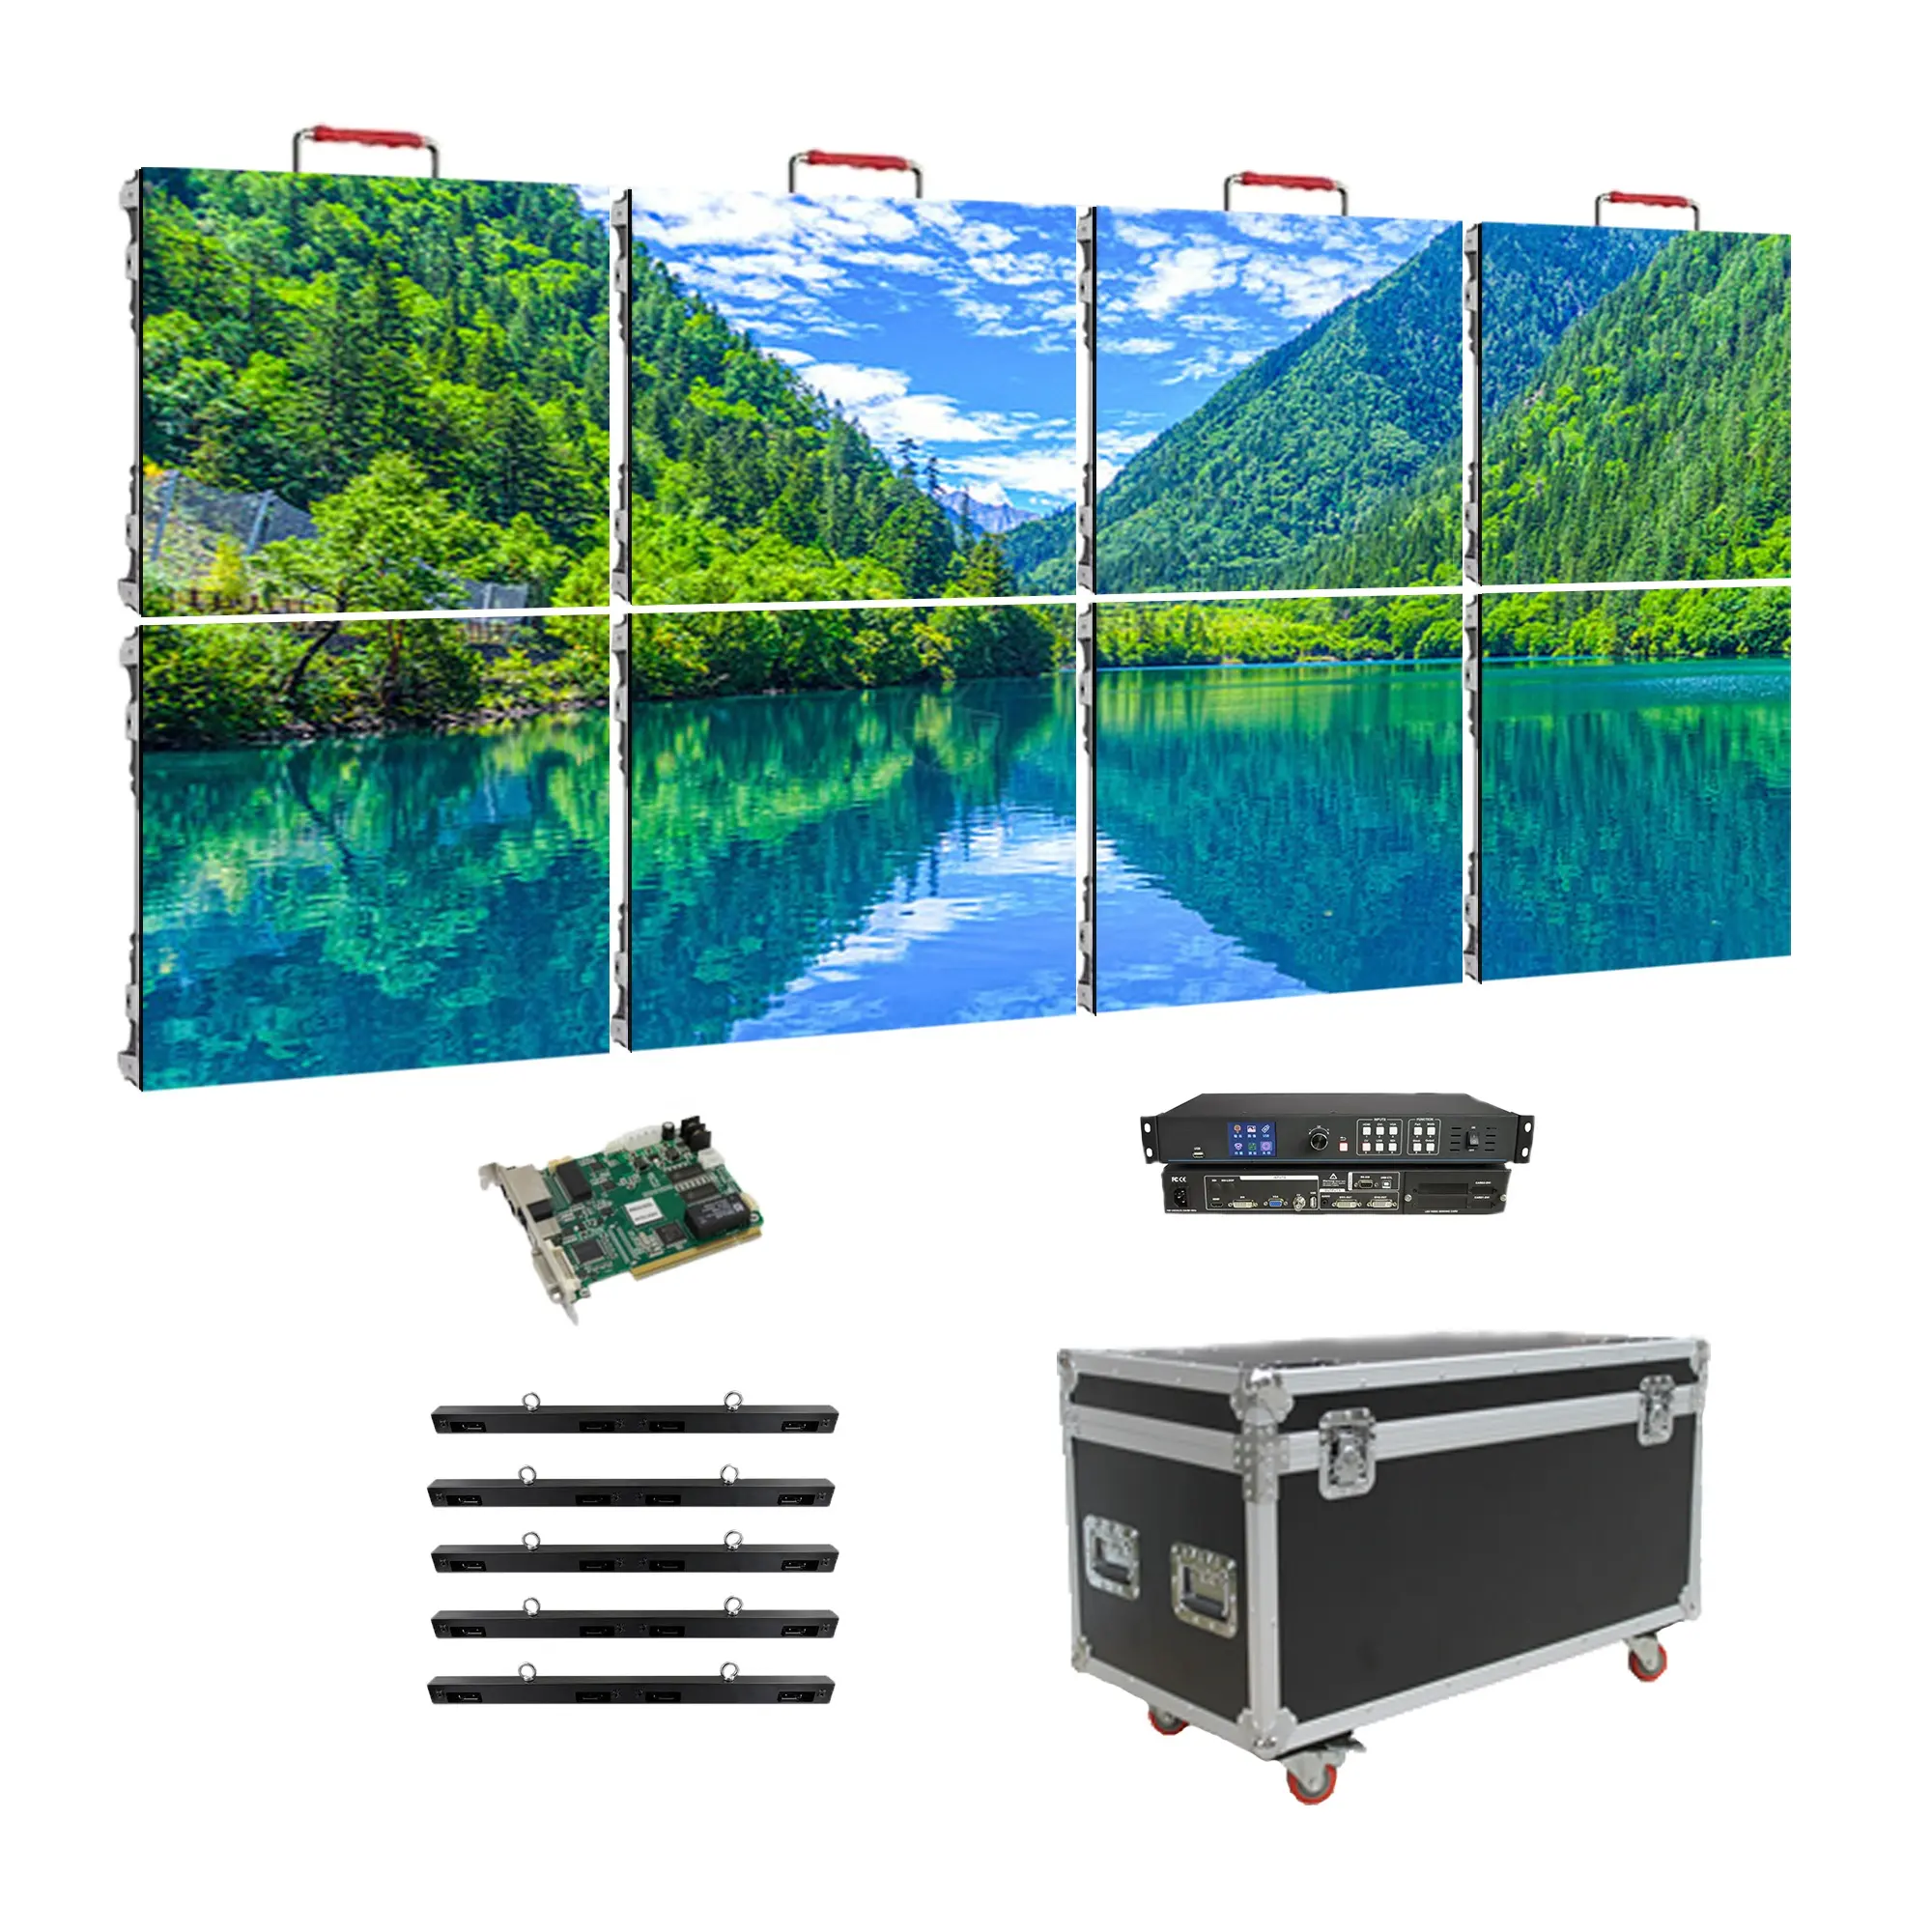 HD P3.91 P4.81 Indoor Stage Background Led Tv Studio Screen/P1.95 P2.604 P2.976 Indoor Led Video Wall Panel Screen